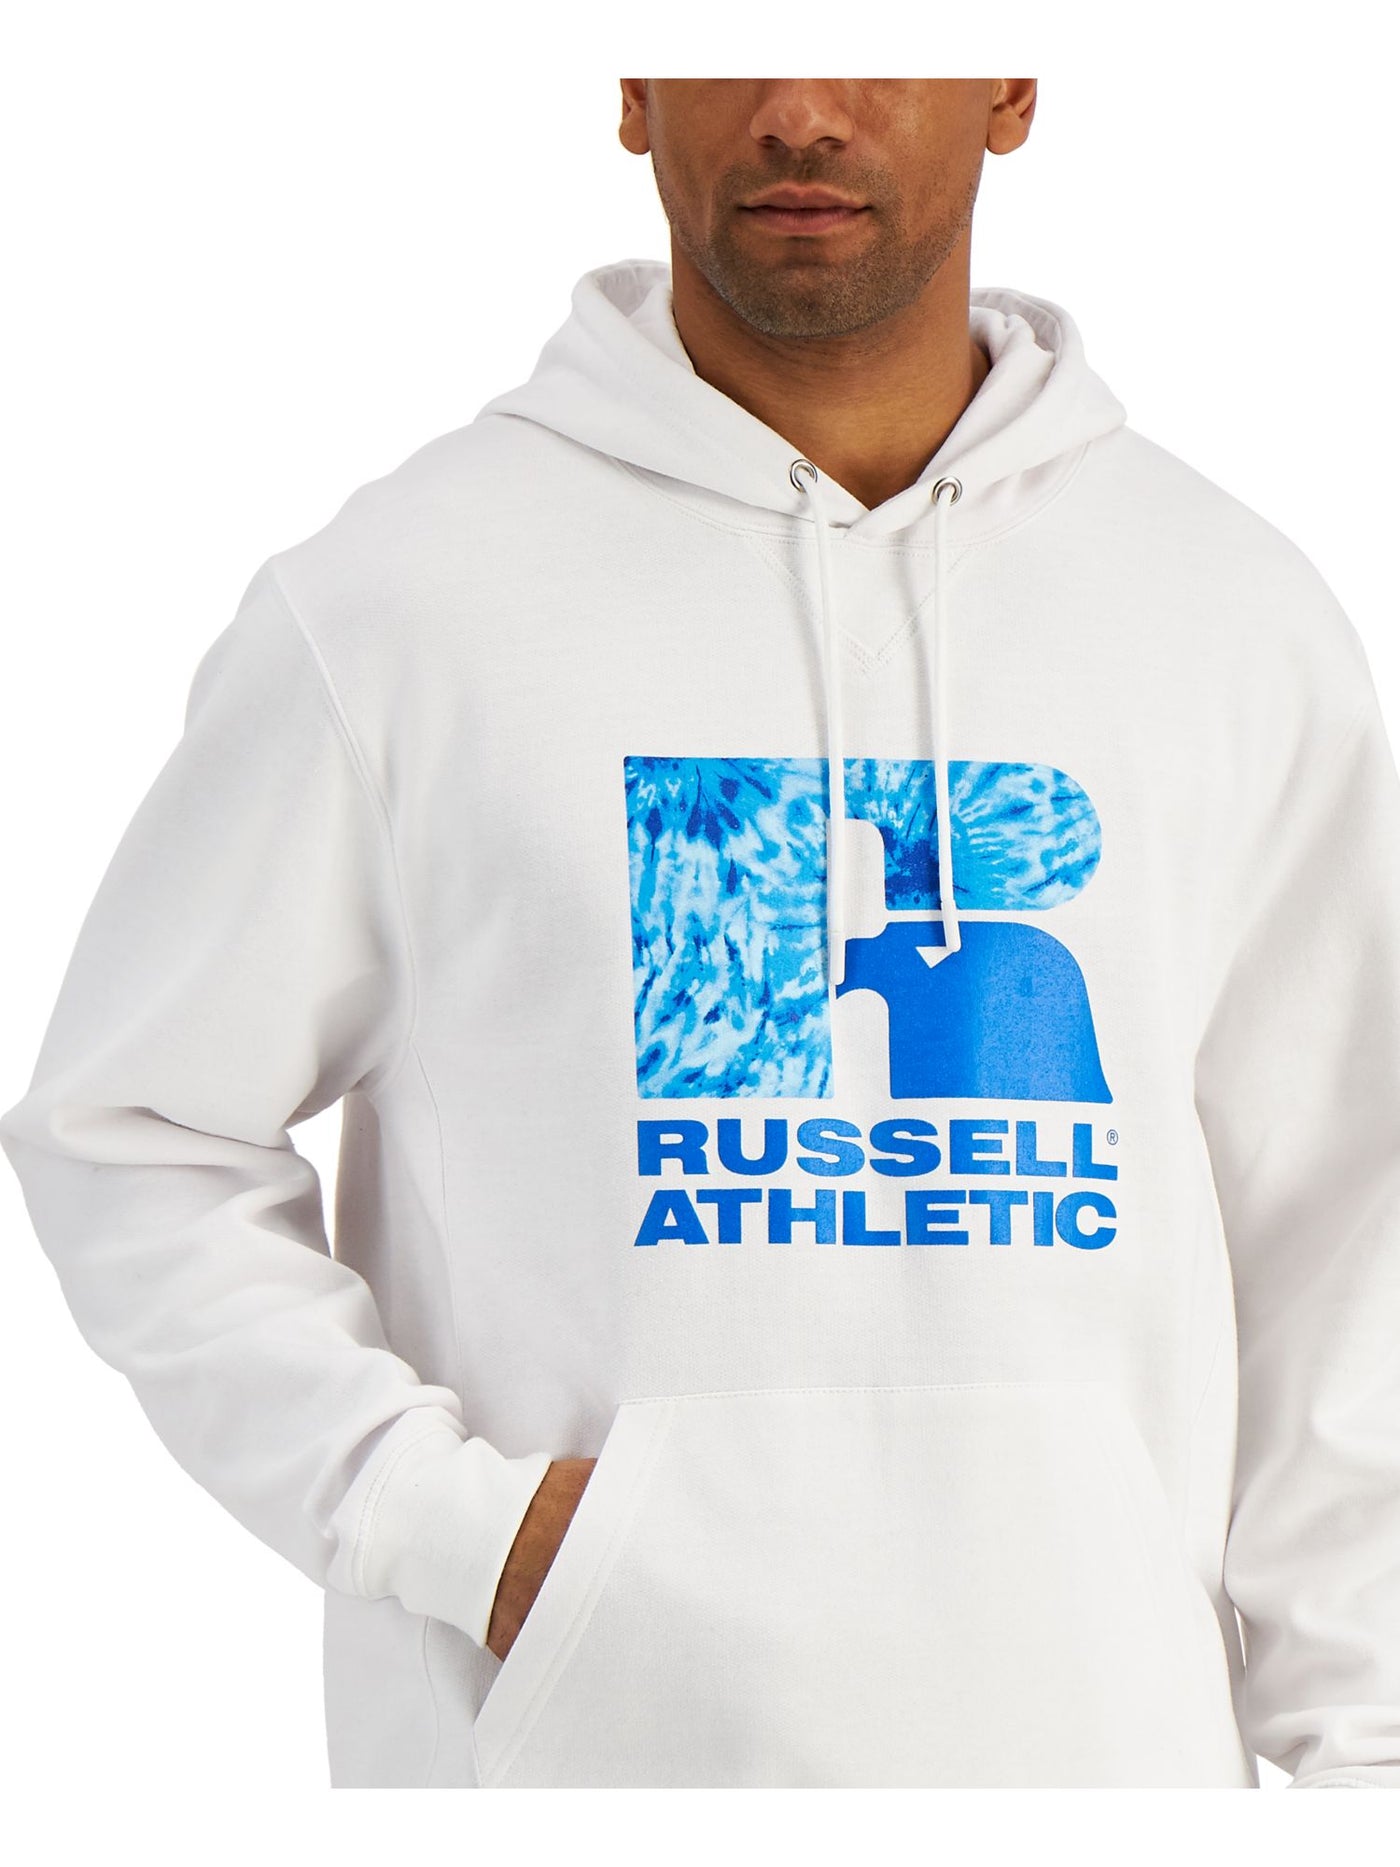 RUSSELL ATHLETIC Mens Santiago White Graphic Draw String Hoodie S